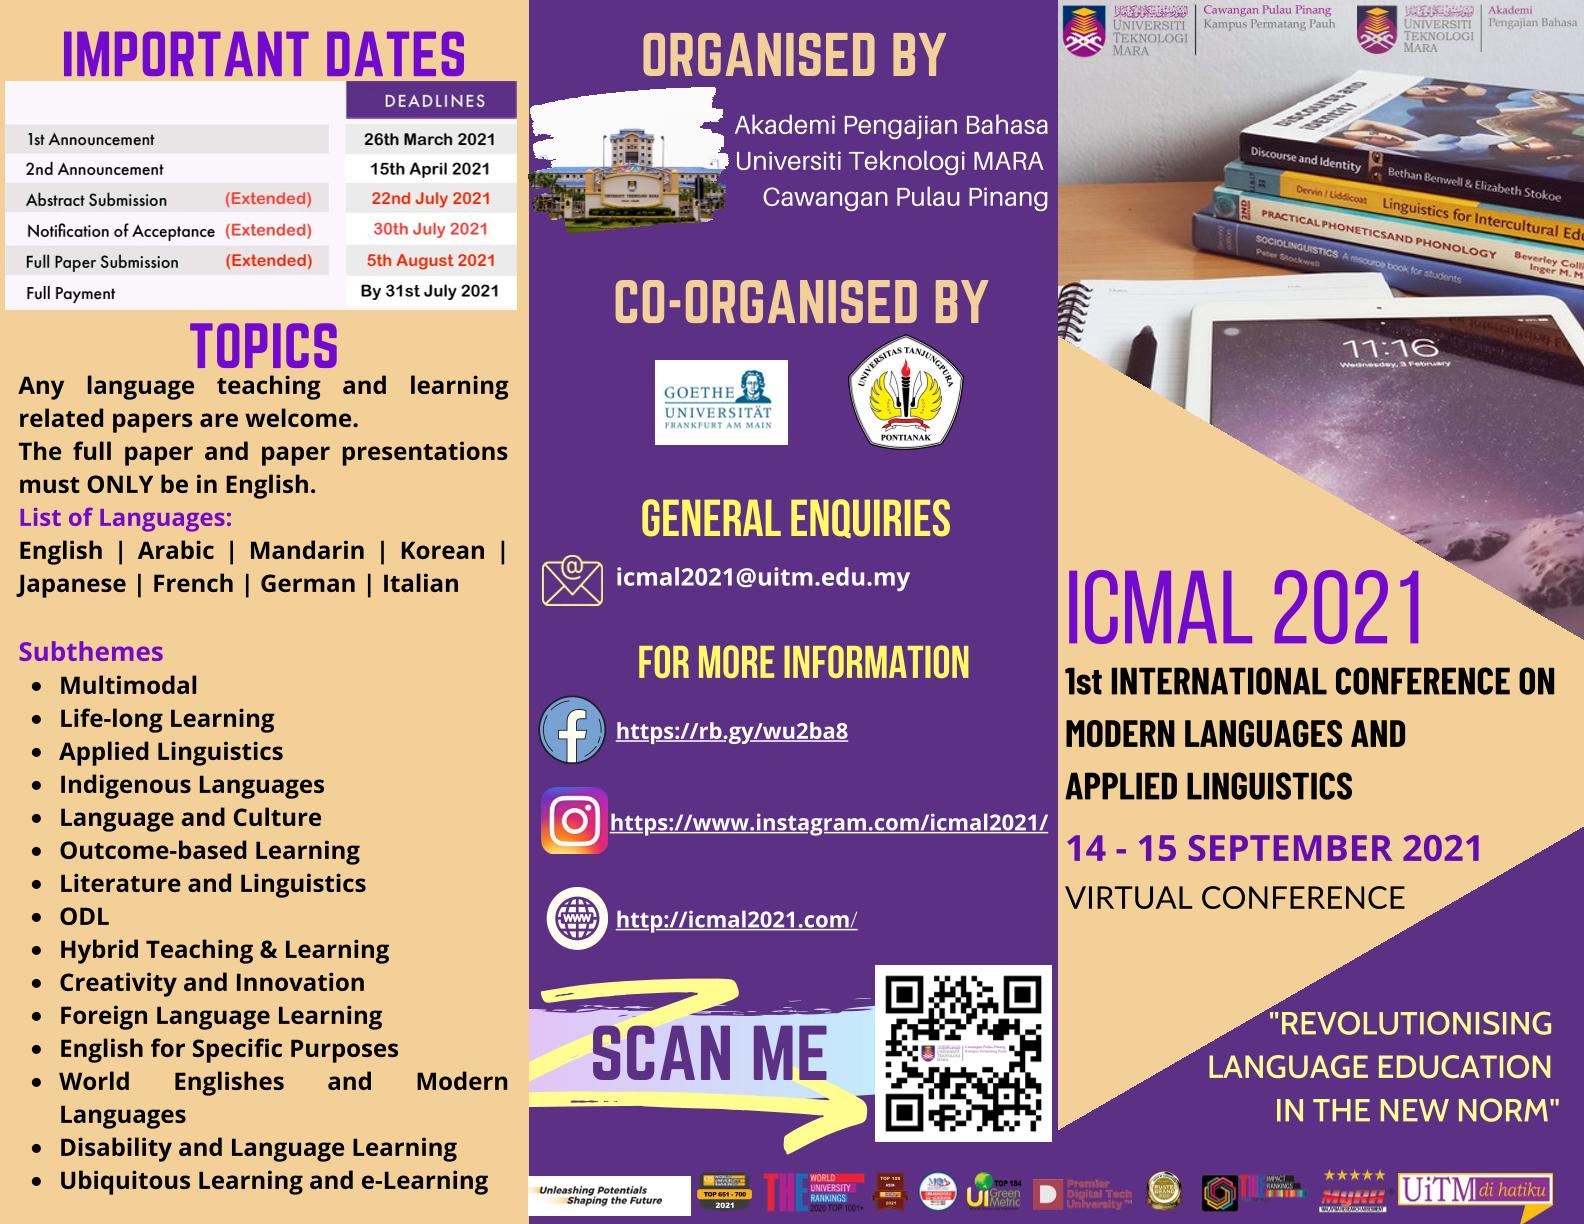 ICMAL 2021: 1st International Conference on Modern Languages and Applied Linguistics 5